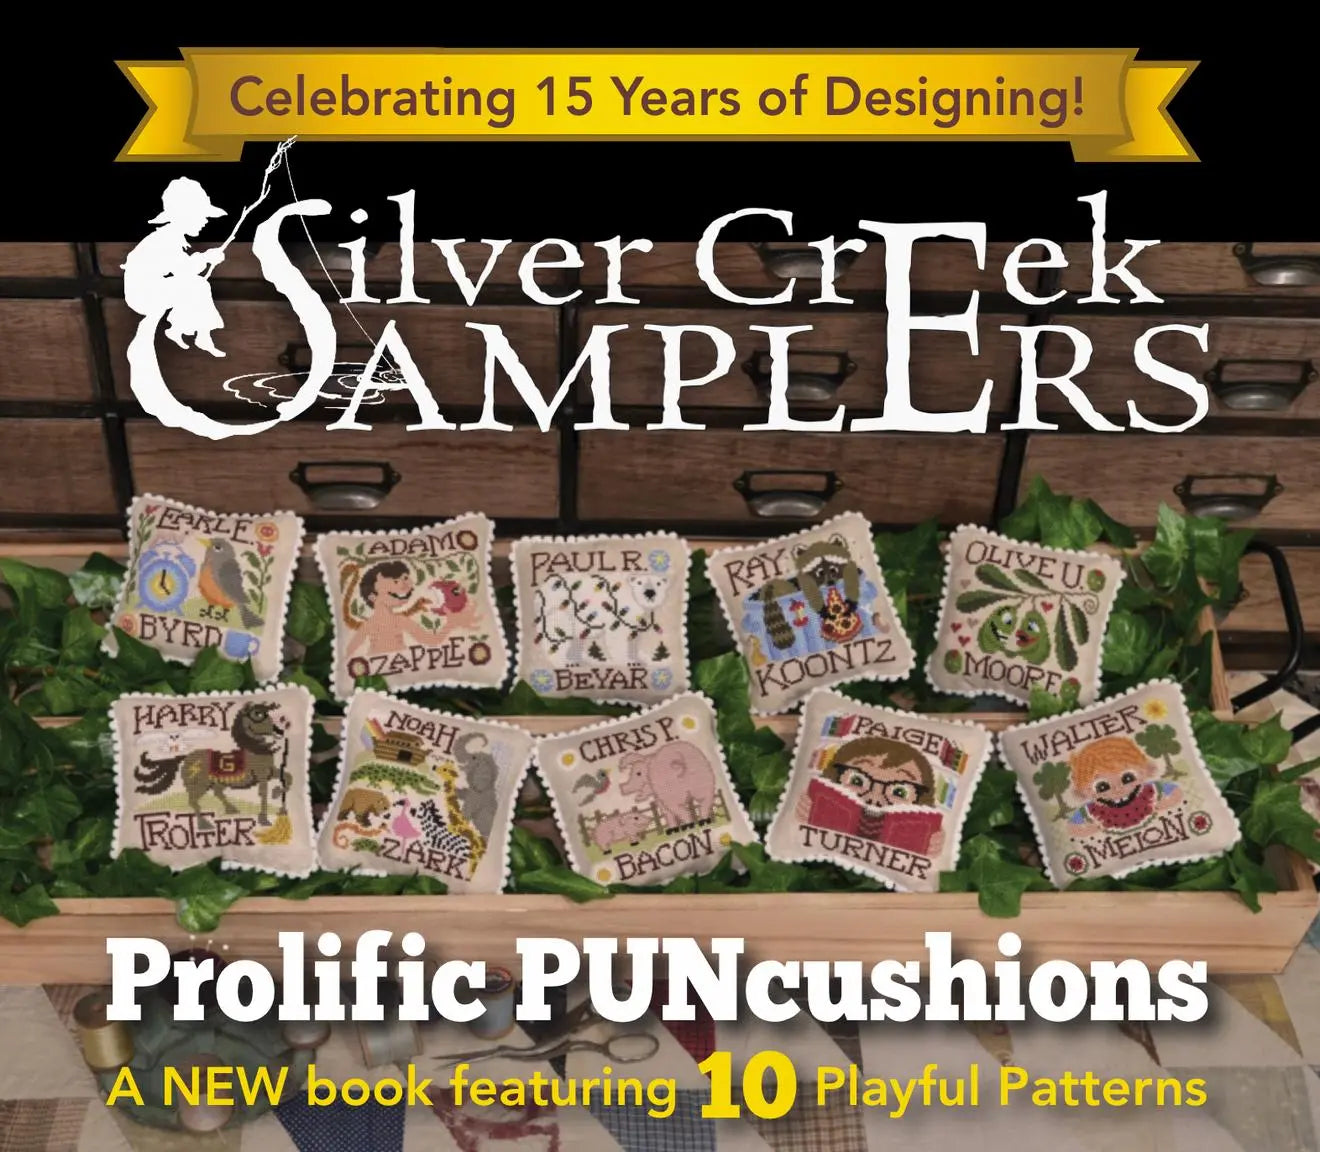 Prolific Puncushions by Silver Creek Samplers (Pre-order) Silver Creek Samplers